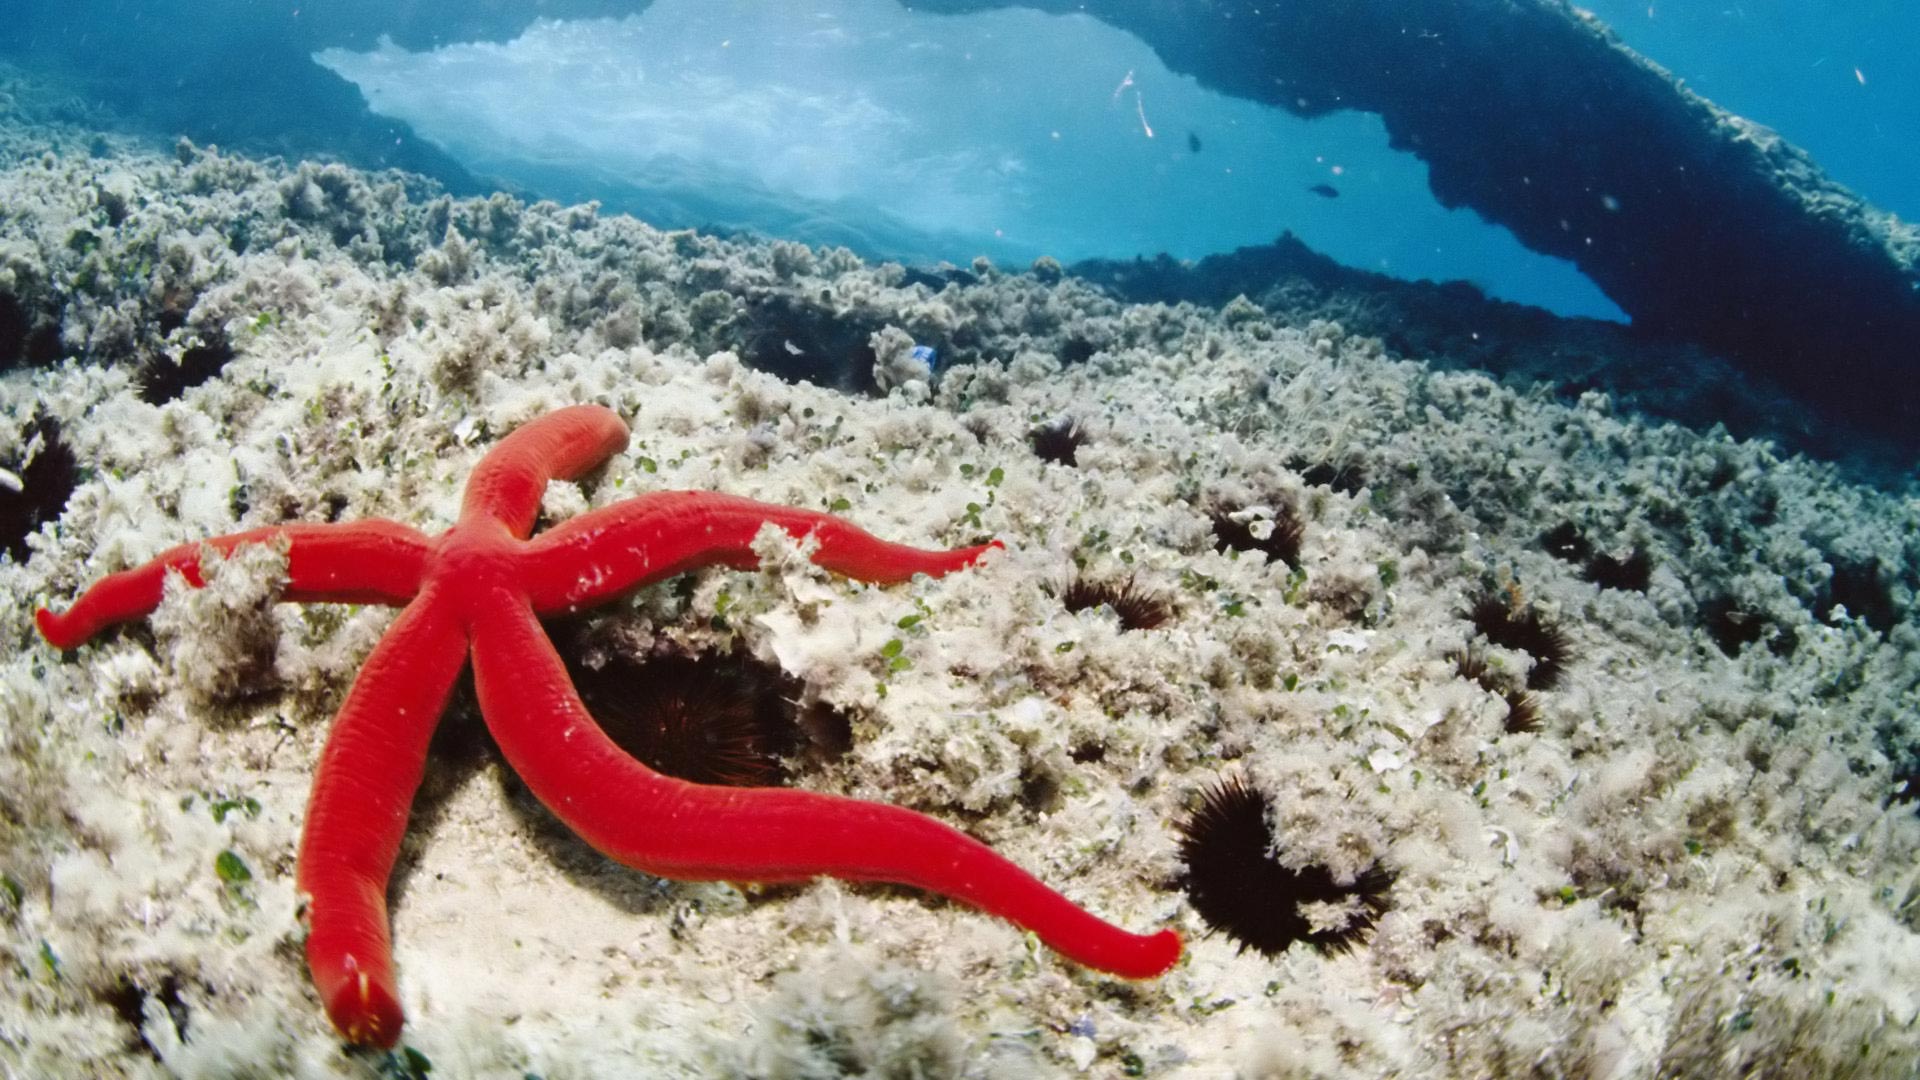 Red starfish in the middle of the ocean - HD see animals